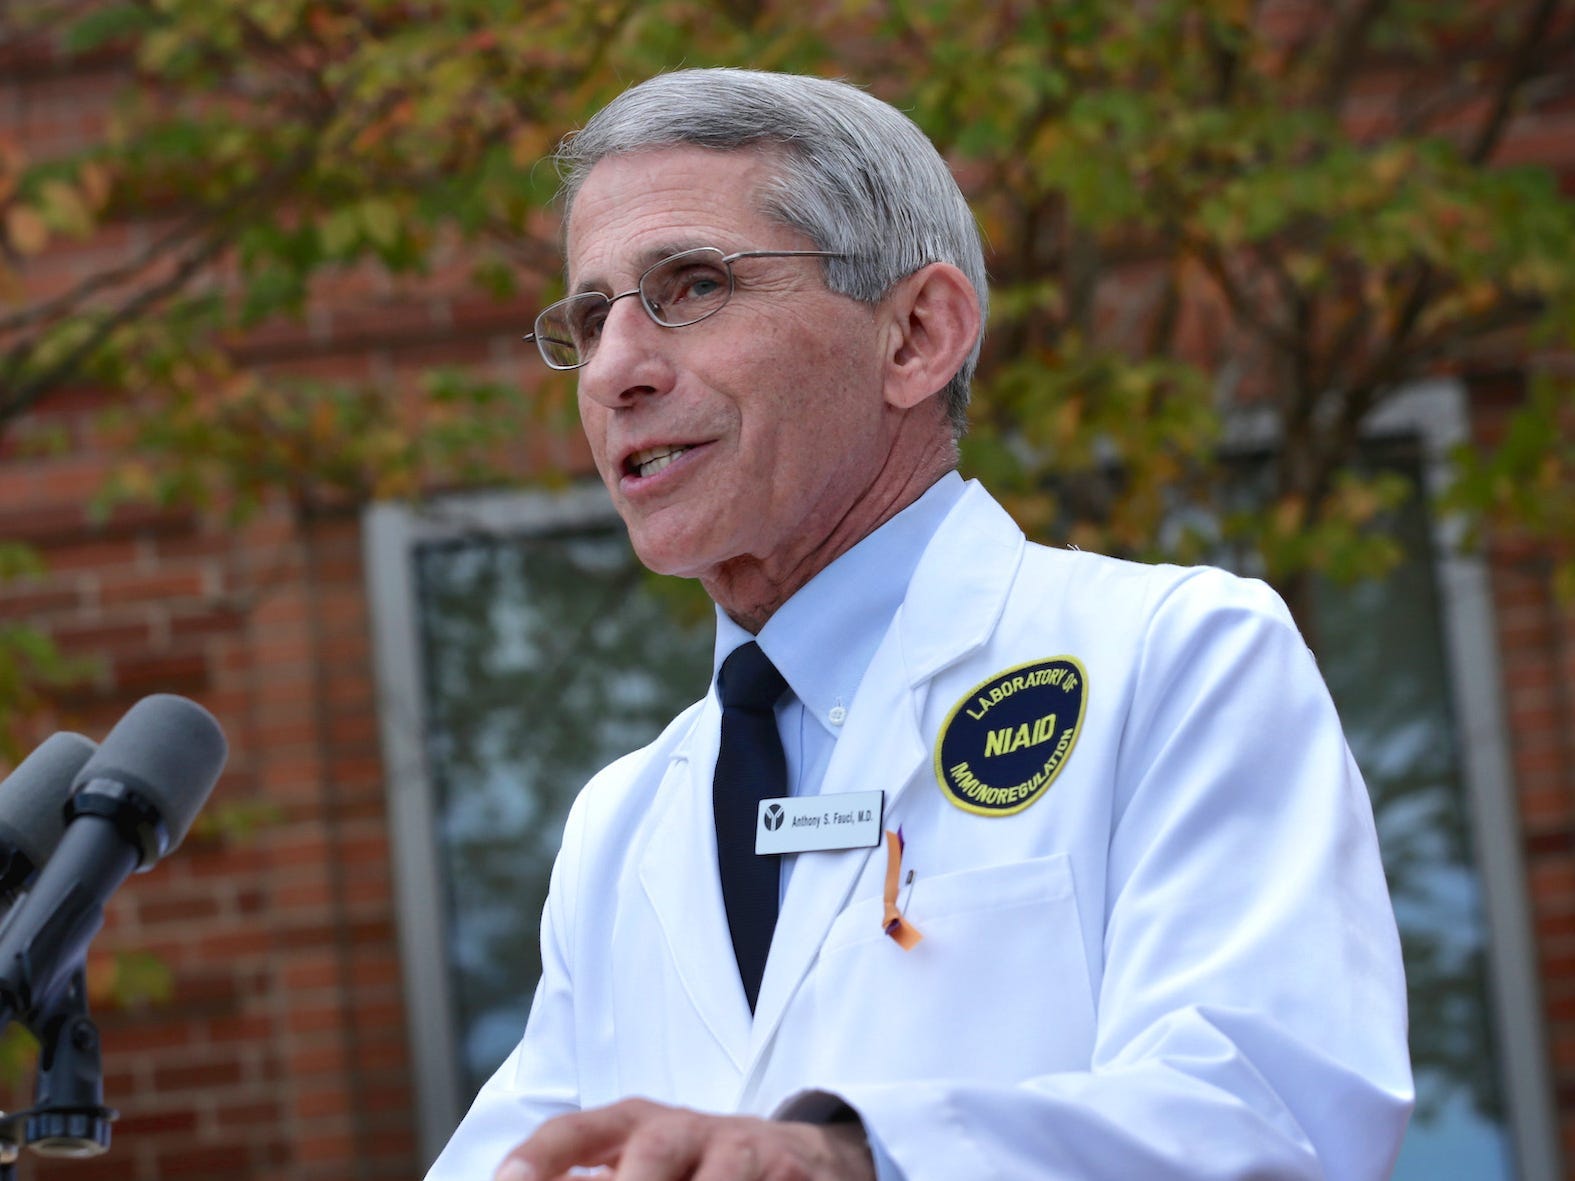 Dr. Anthony Fauci, Director of the National Institute of Allergy and Infectious Diseases, speaks to members of the media at the National Institutes of Health October 24, 2014 in Bethesda, Maryland.